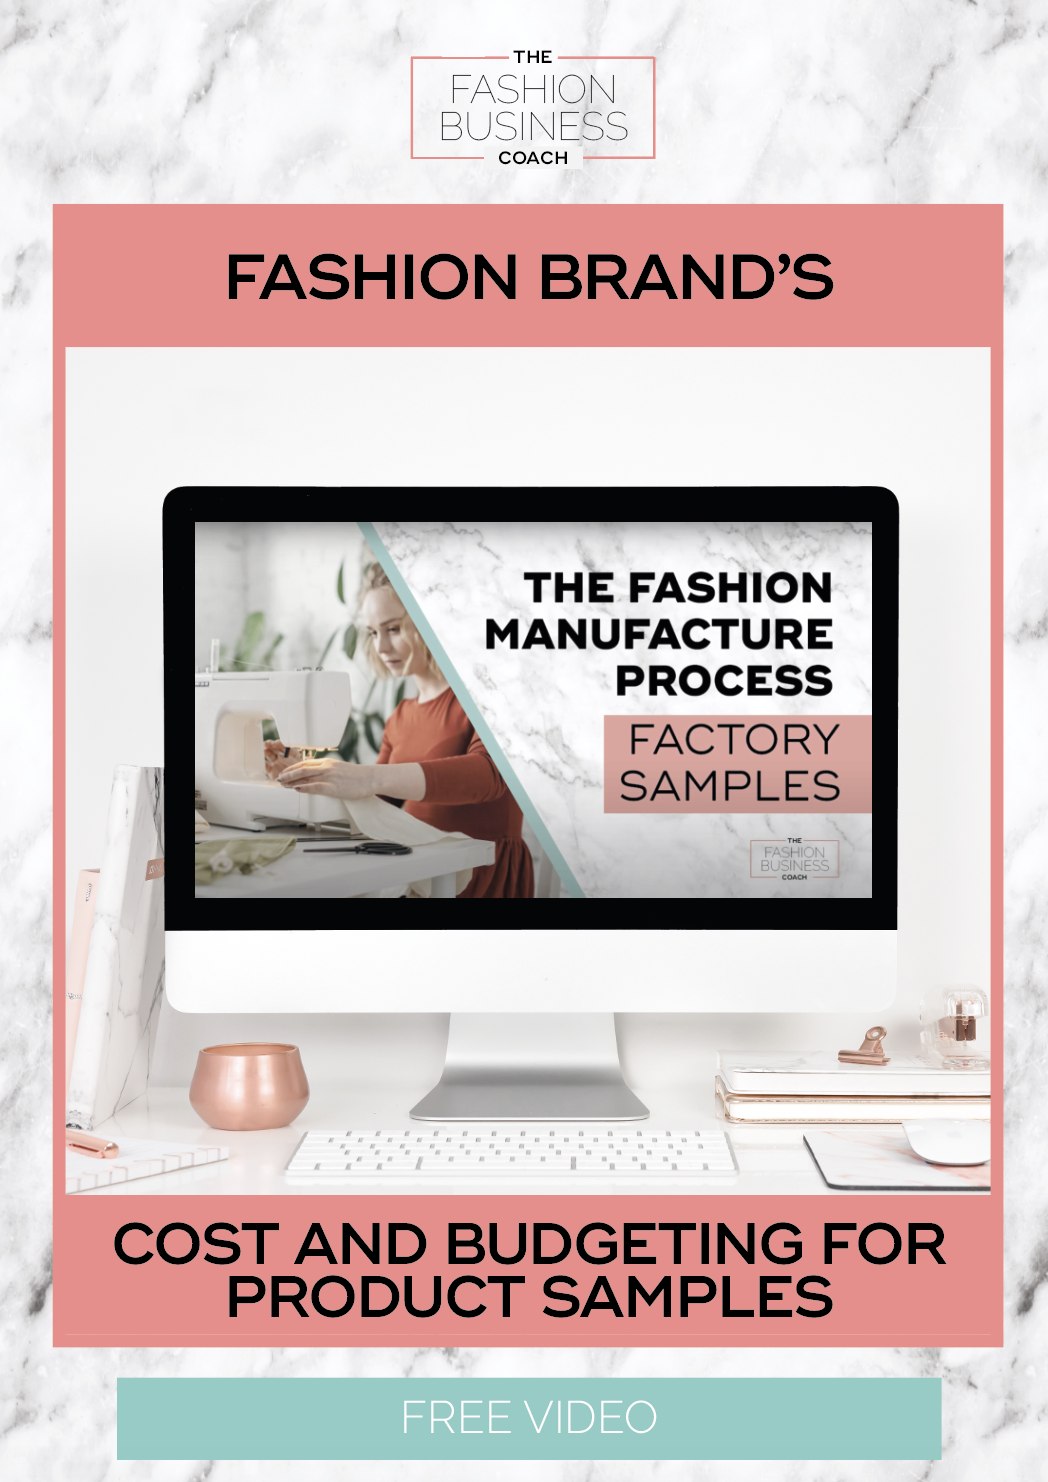 The Fashion Brand’s Cost and Budgeting for Product Samples 3.png